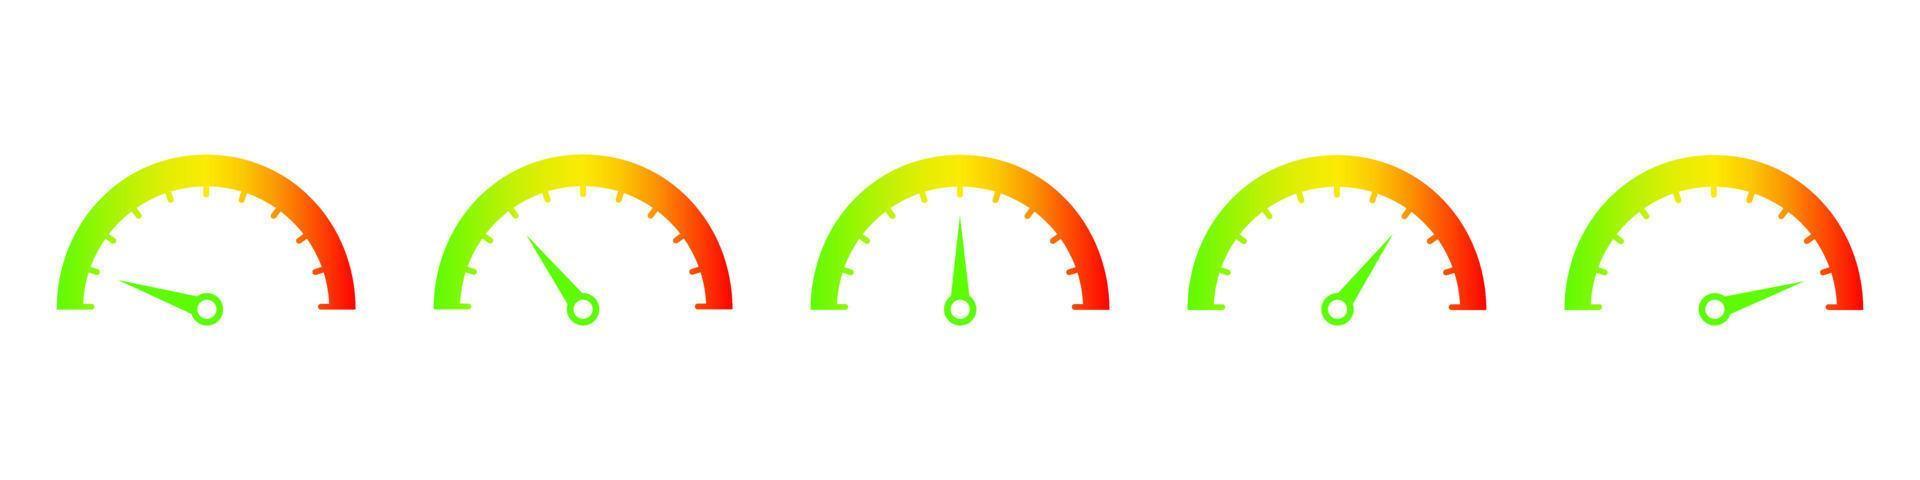 Speedometers showing ascending speed icon. Indicator with arrow green beginning progress and turning into red dangerous assessment performance and vector quality